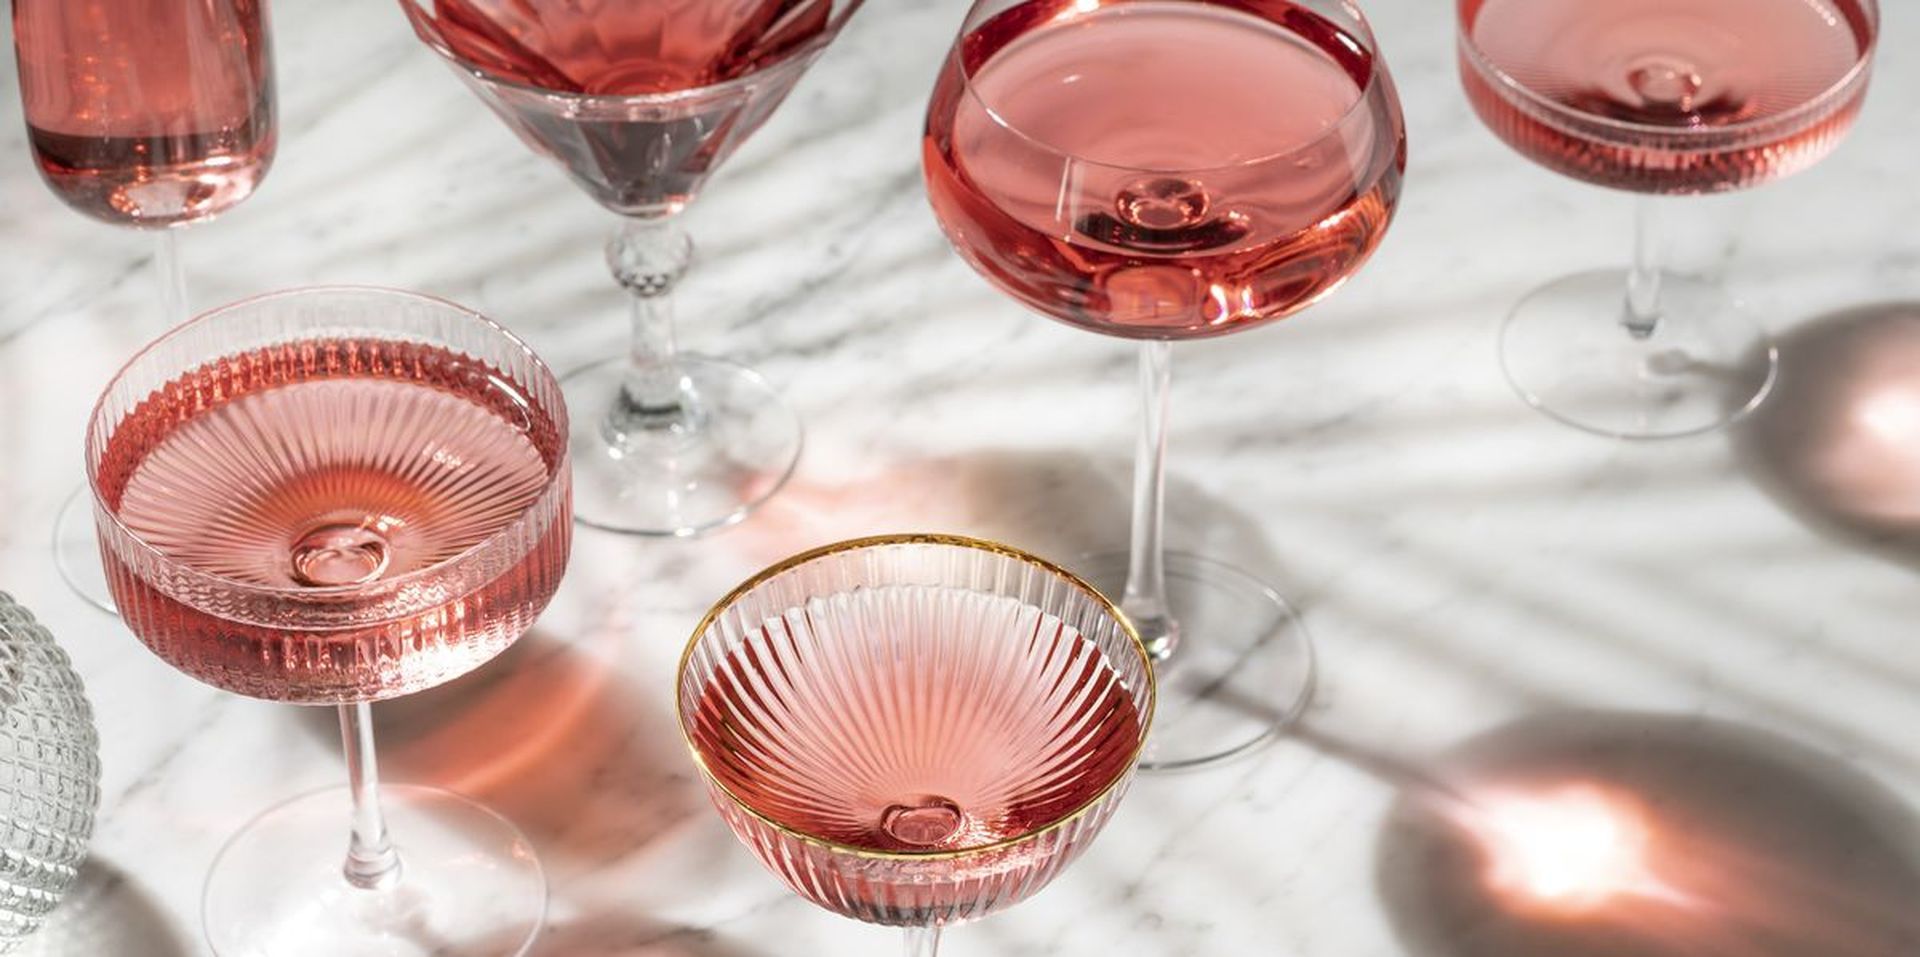 In this article, we are going to be covering the TikTok spicy rose wine trend, what it is, who created it, and how you can make the drink.